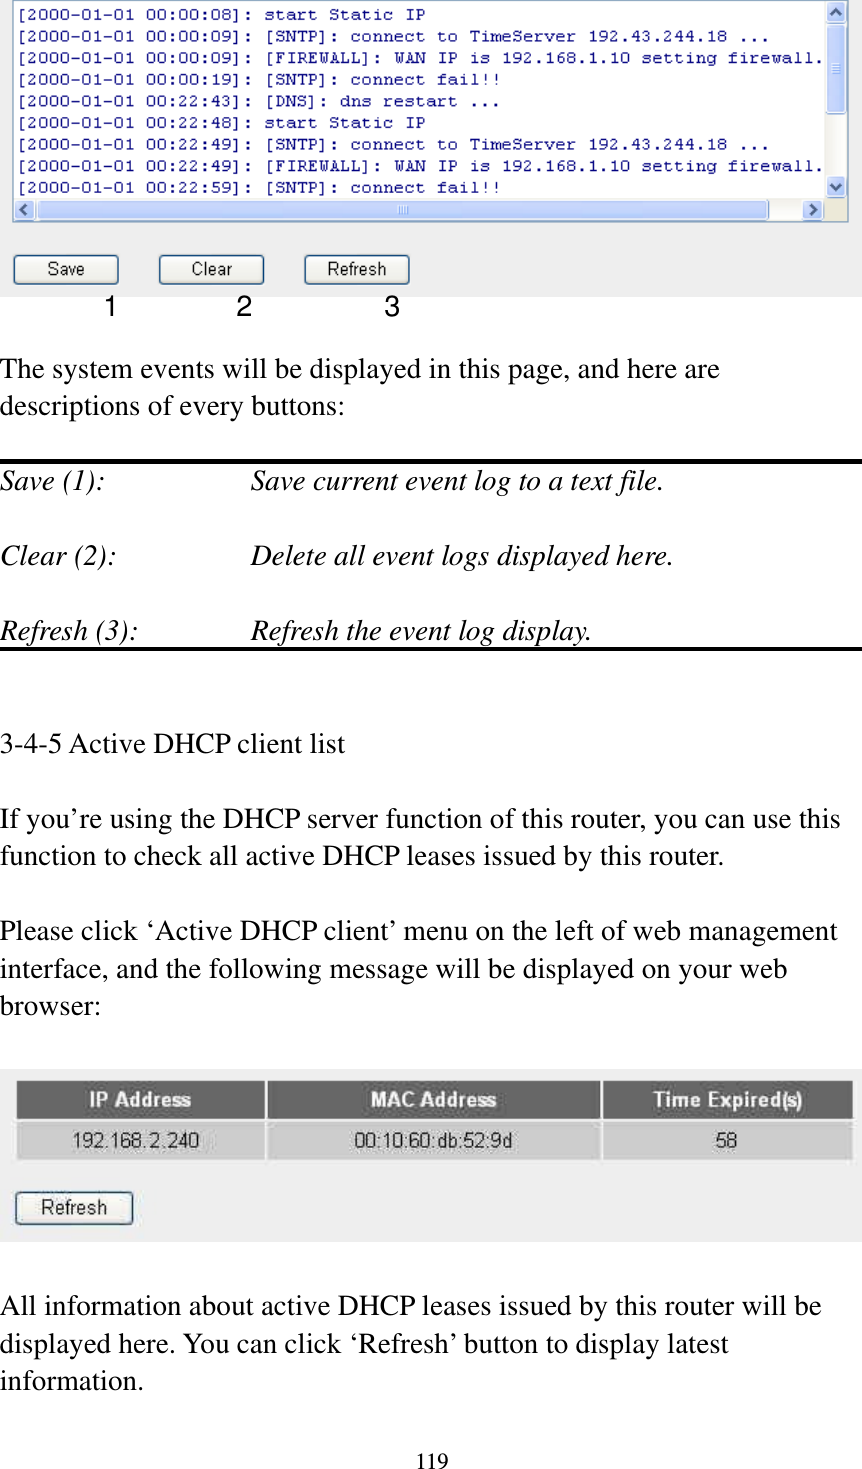 119   The system events will be displayed in this page, and here are descriptions of every buttons:  Save (1):        Save current event log to a text file.  Clear (2):        Delete all event logs displayed here.  Refresh (3):      Refresh the event log display.   3-4-5 Active DHCP client list  If you’re using the DHCP server function of this router, you can use this function to check all active DHCP leases issued by this router.  Please click ‘Active DHCP client’ menu on the left of web management interface, and the following message will be displayed on your web browser:    All information about active DHCP leases issued by this router will be displayed here. You can click ‘Refresh’ button to display latest information. 1 2  3